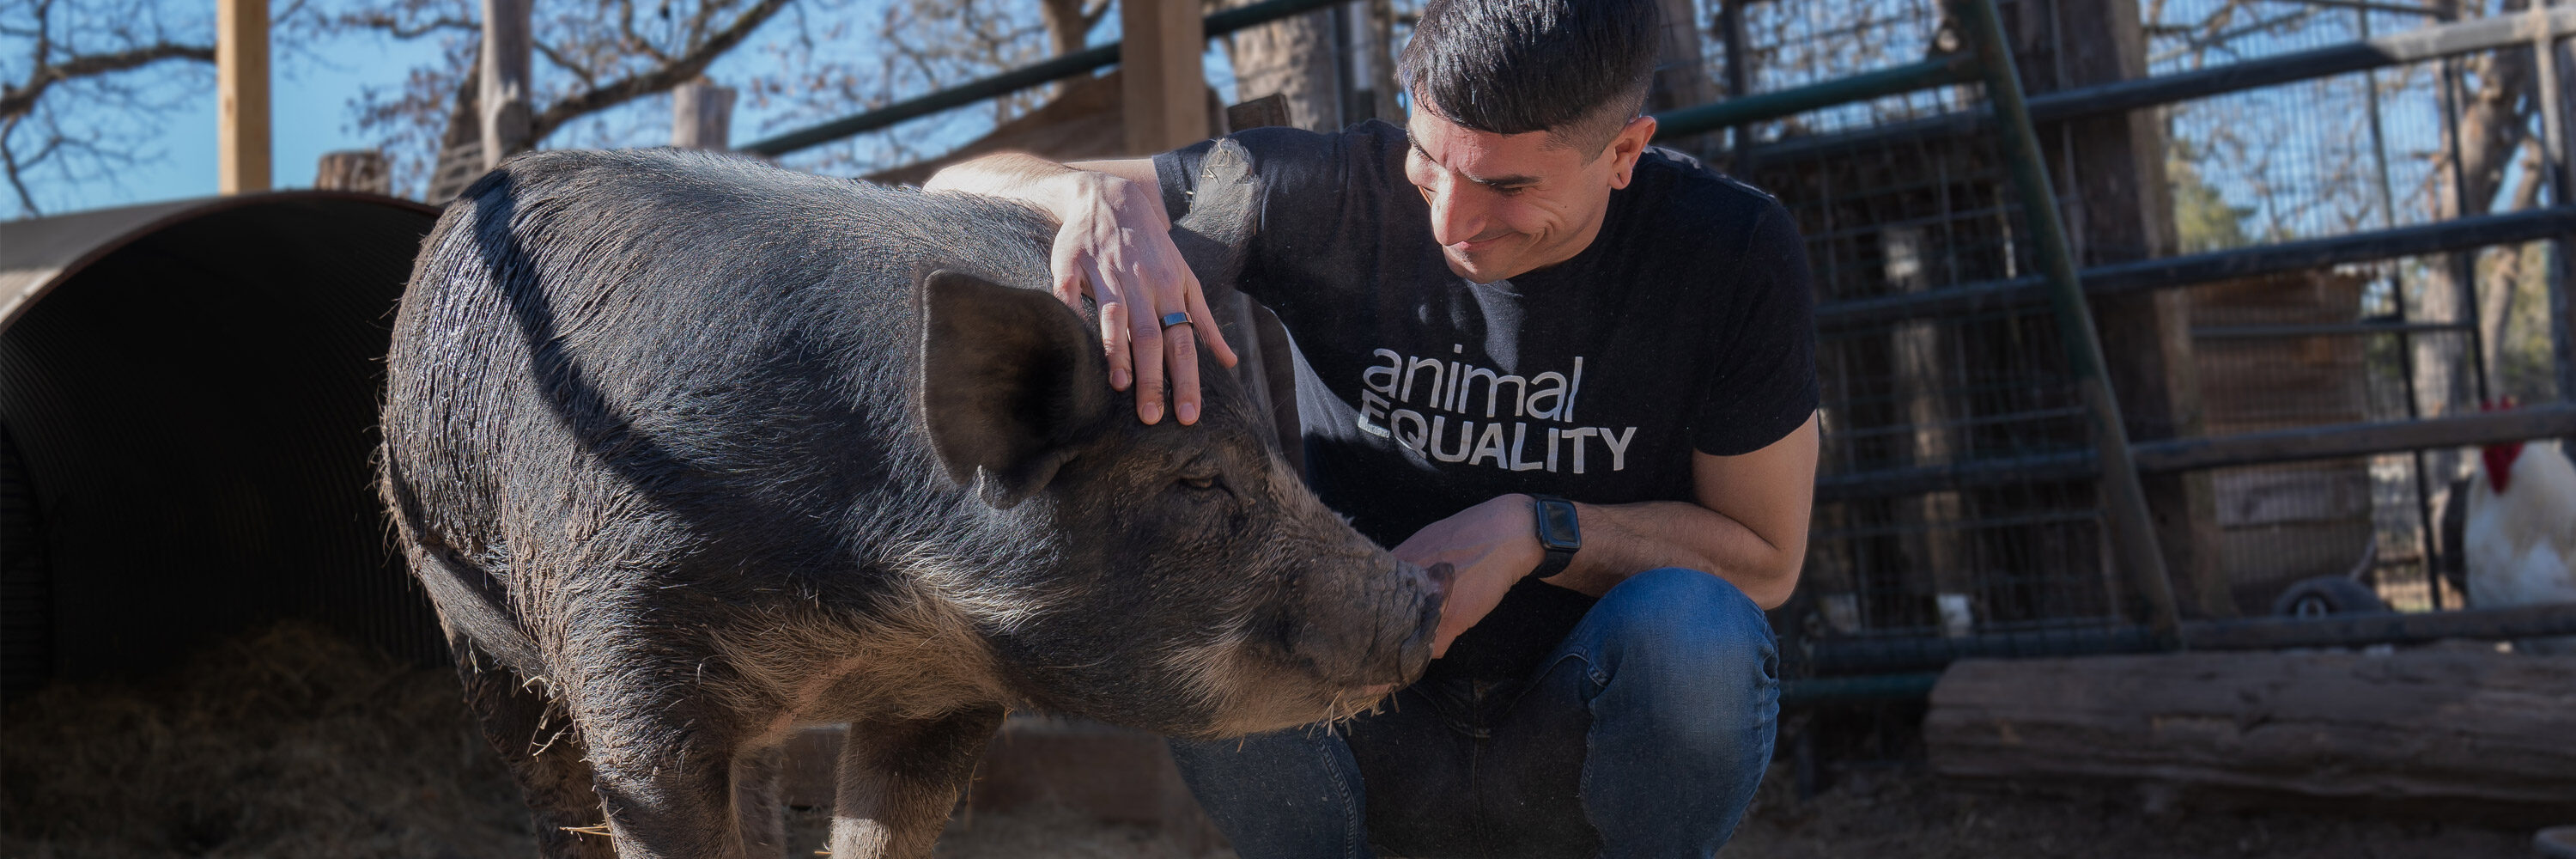 Animal Equality employee holds a pig in a farm sanctuary